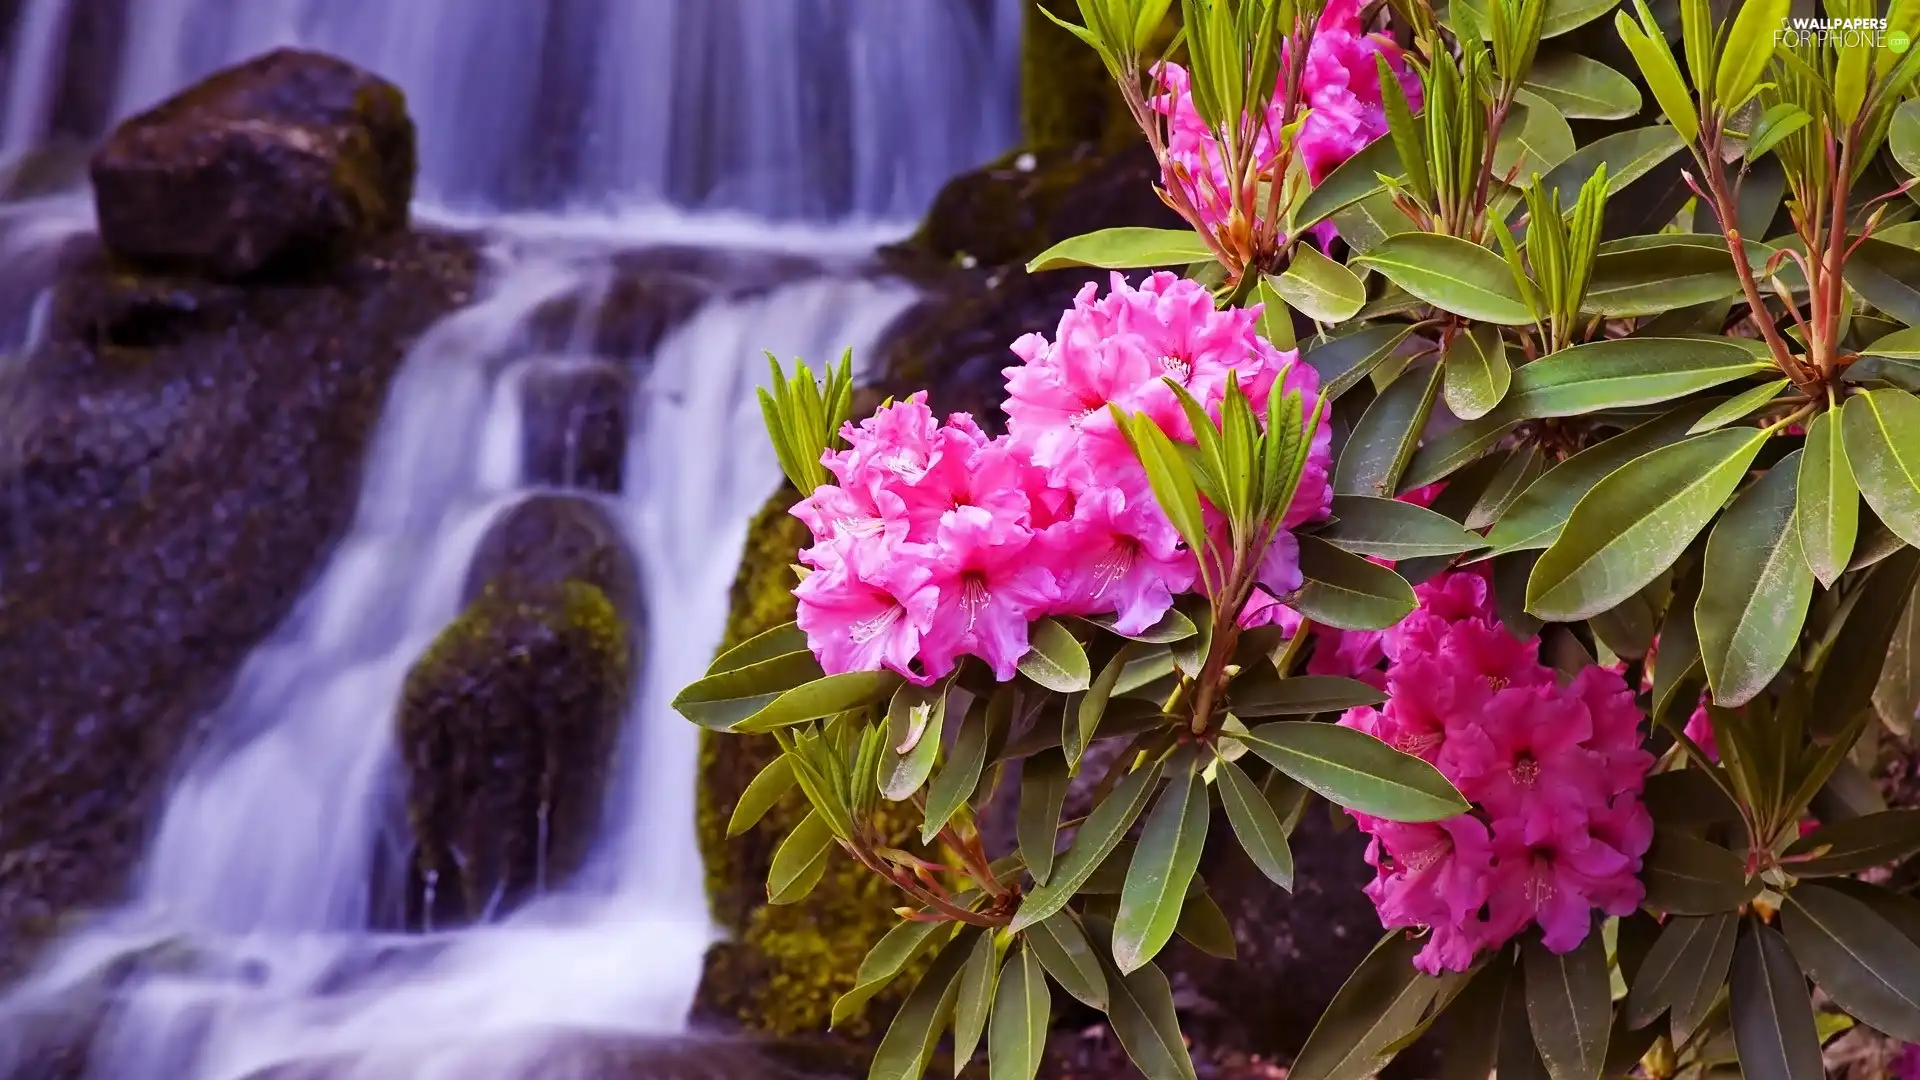 waterfall, Flowers, Rhododendrons